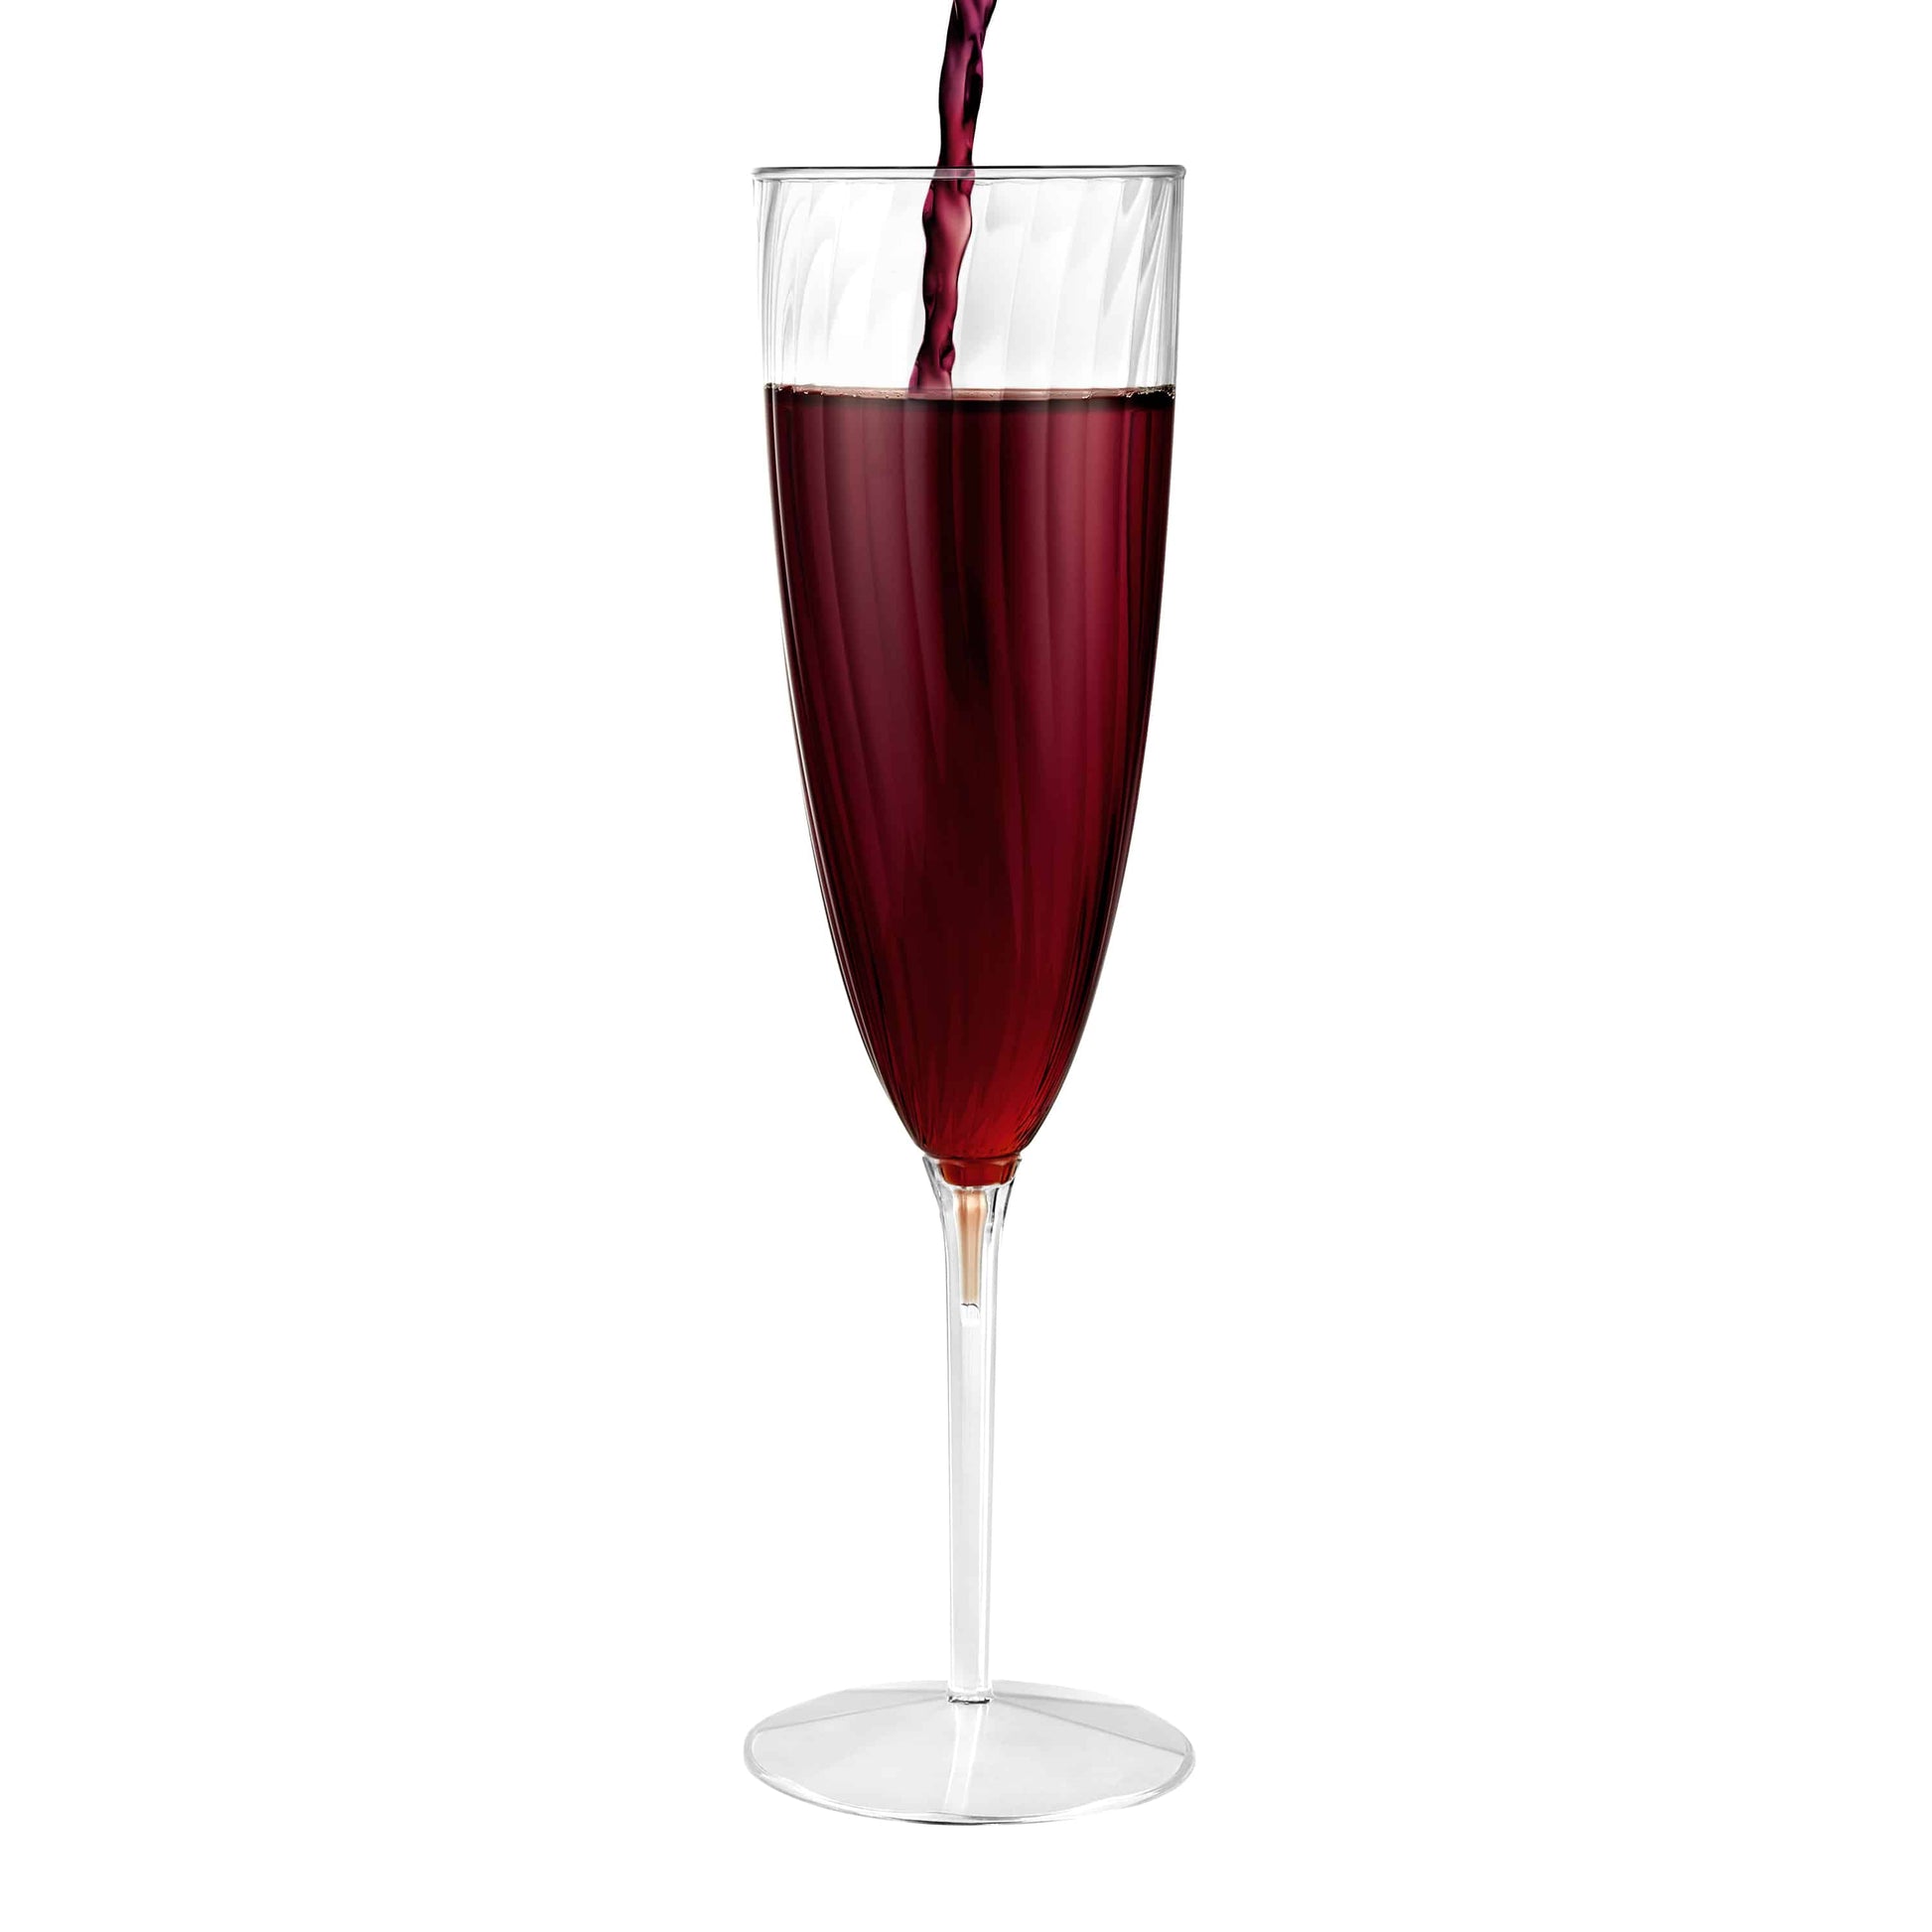 Premium Plastic champagne flute with wine being poured into it